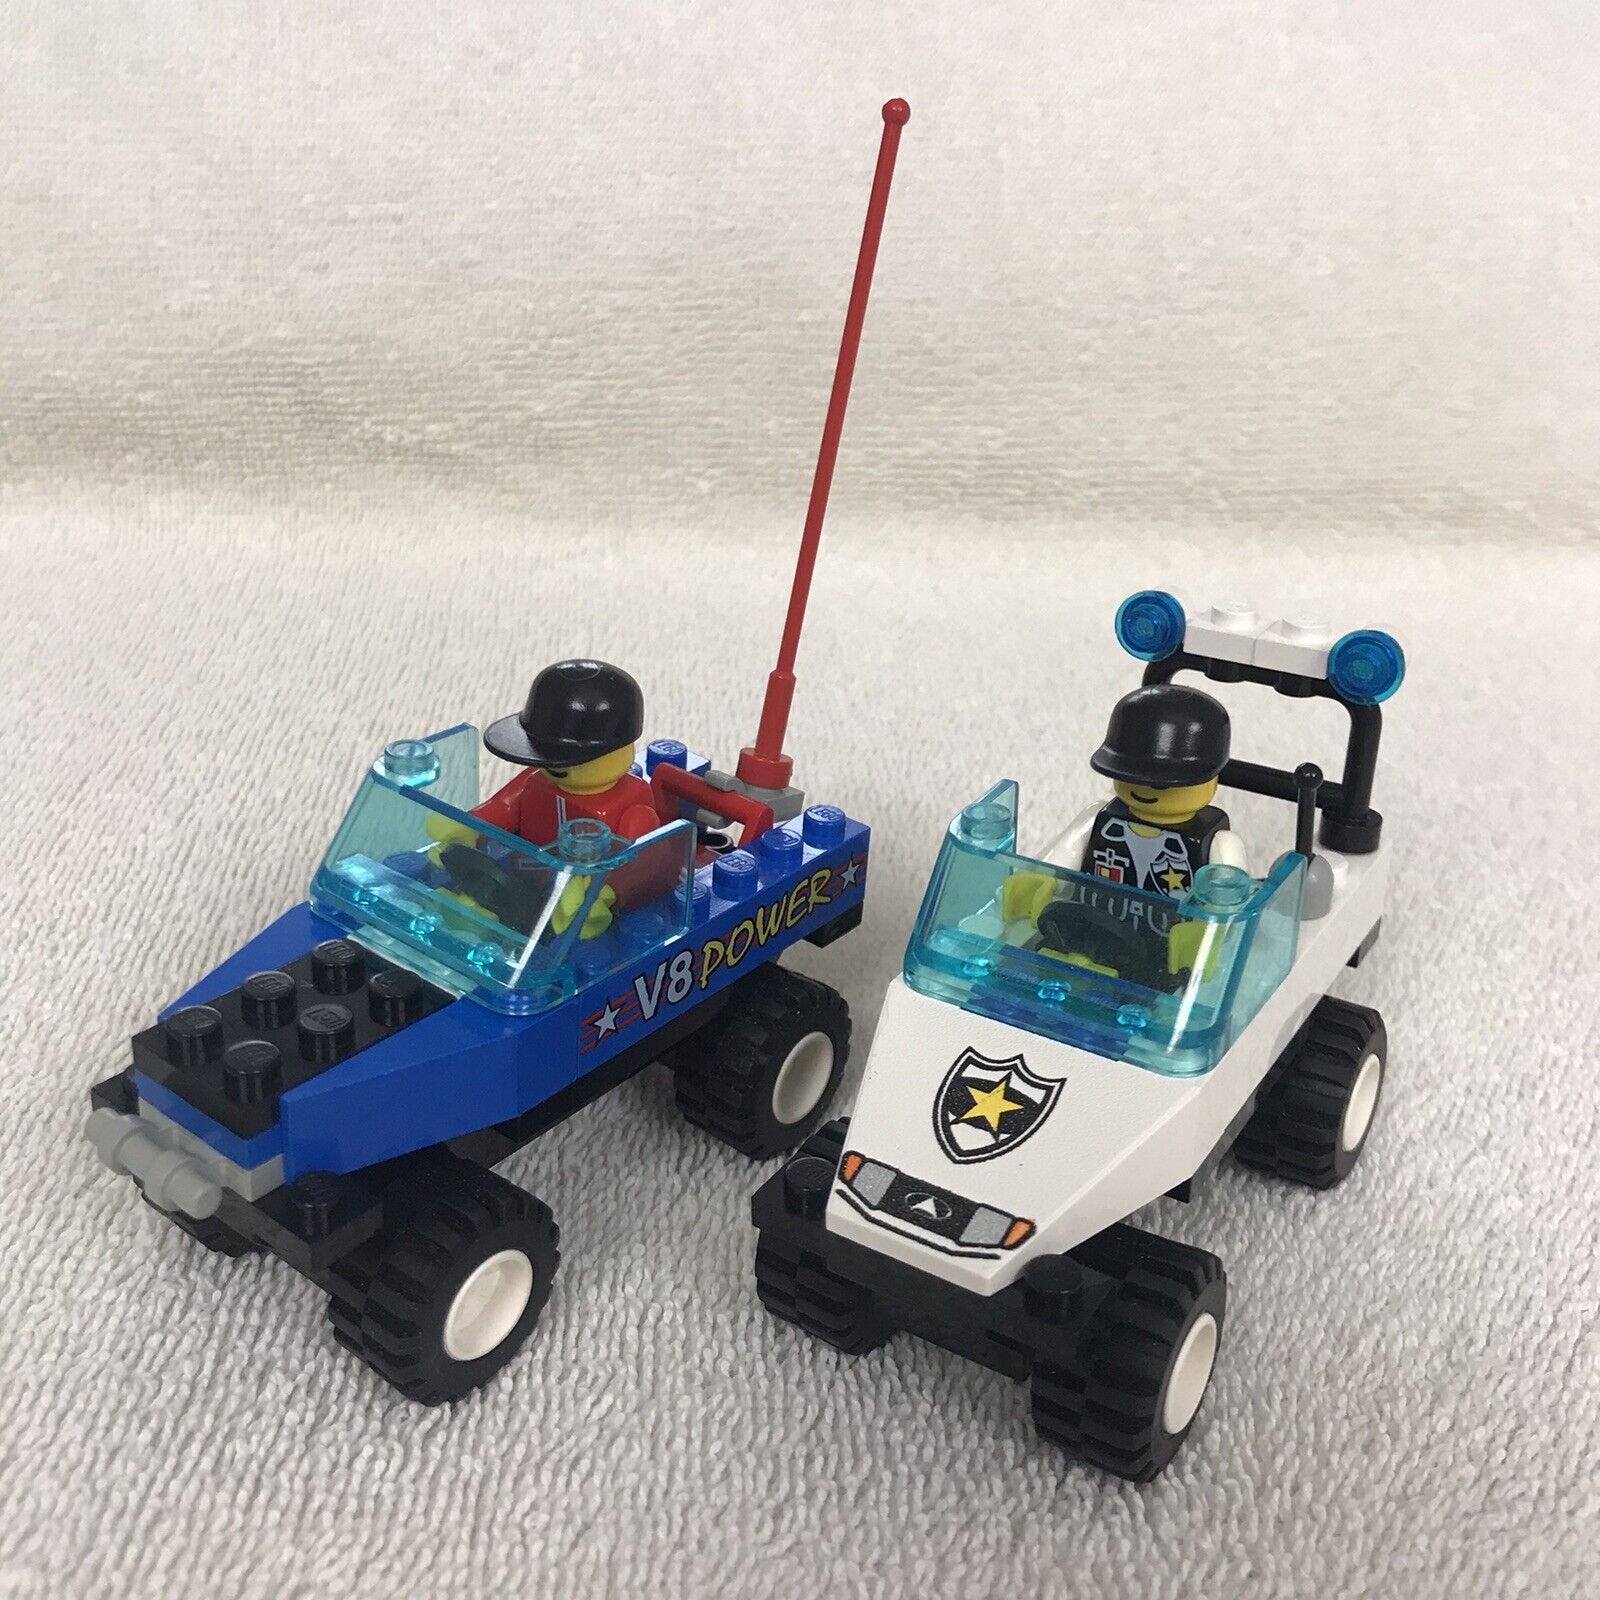 Lego 6333 Town Race and Chase Car Police Play Set From 1998 Vintage Minifigures